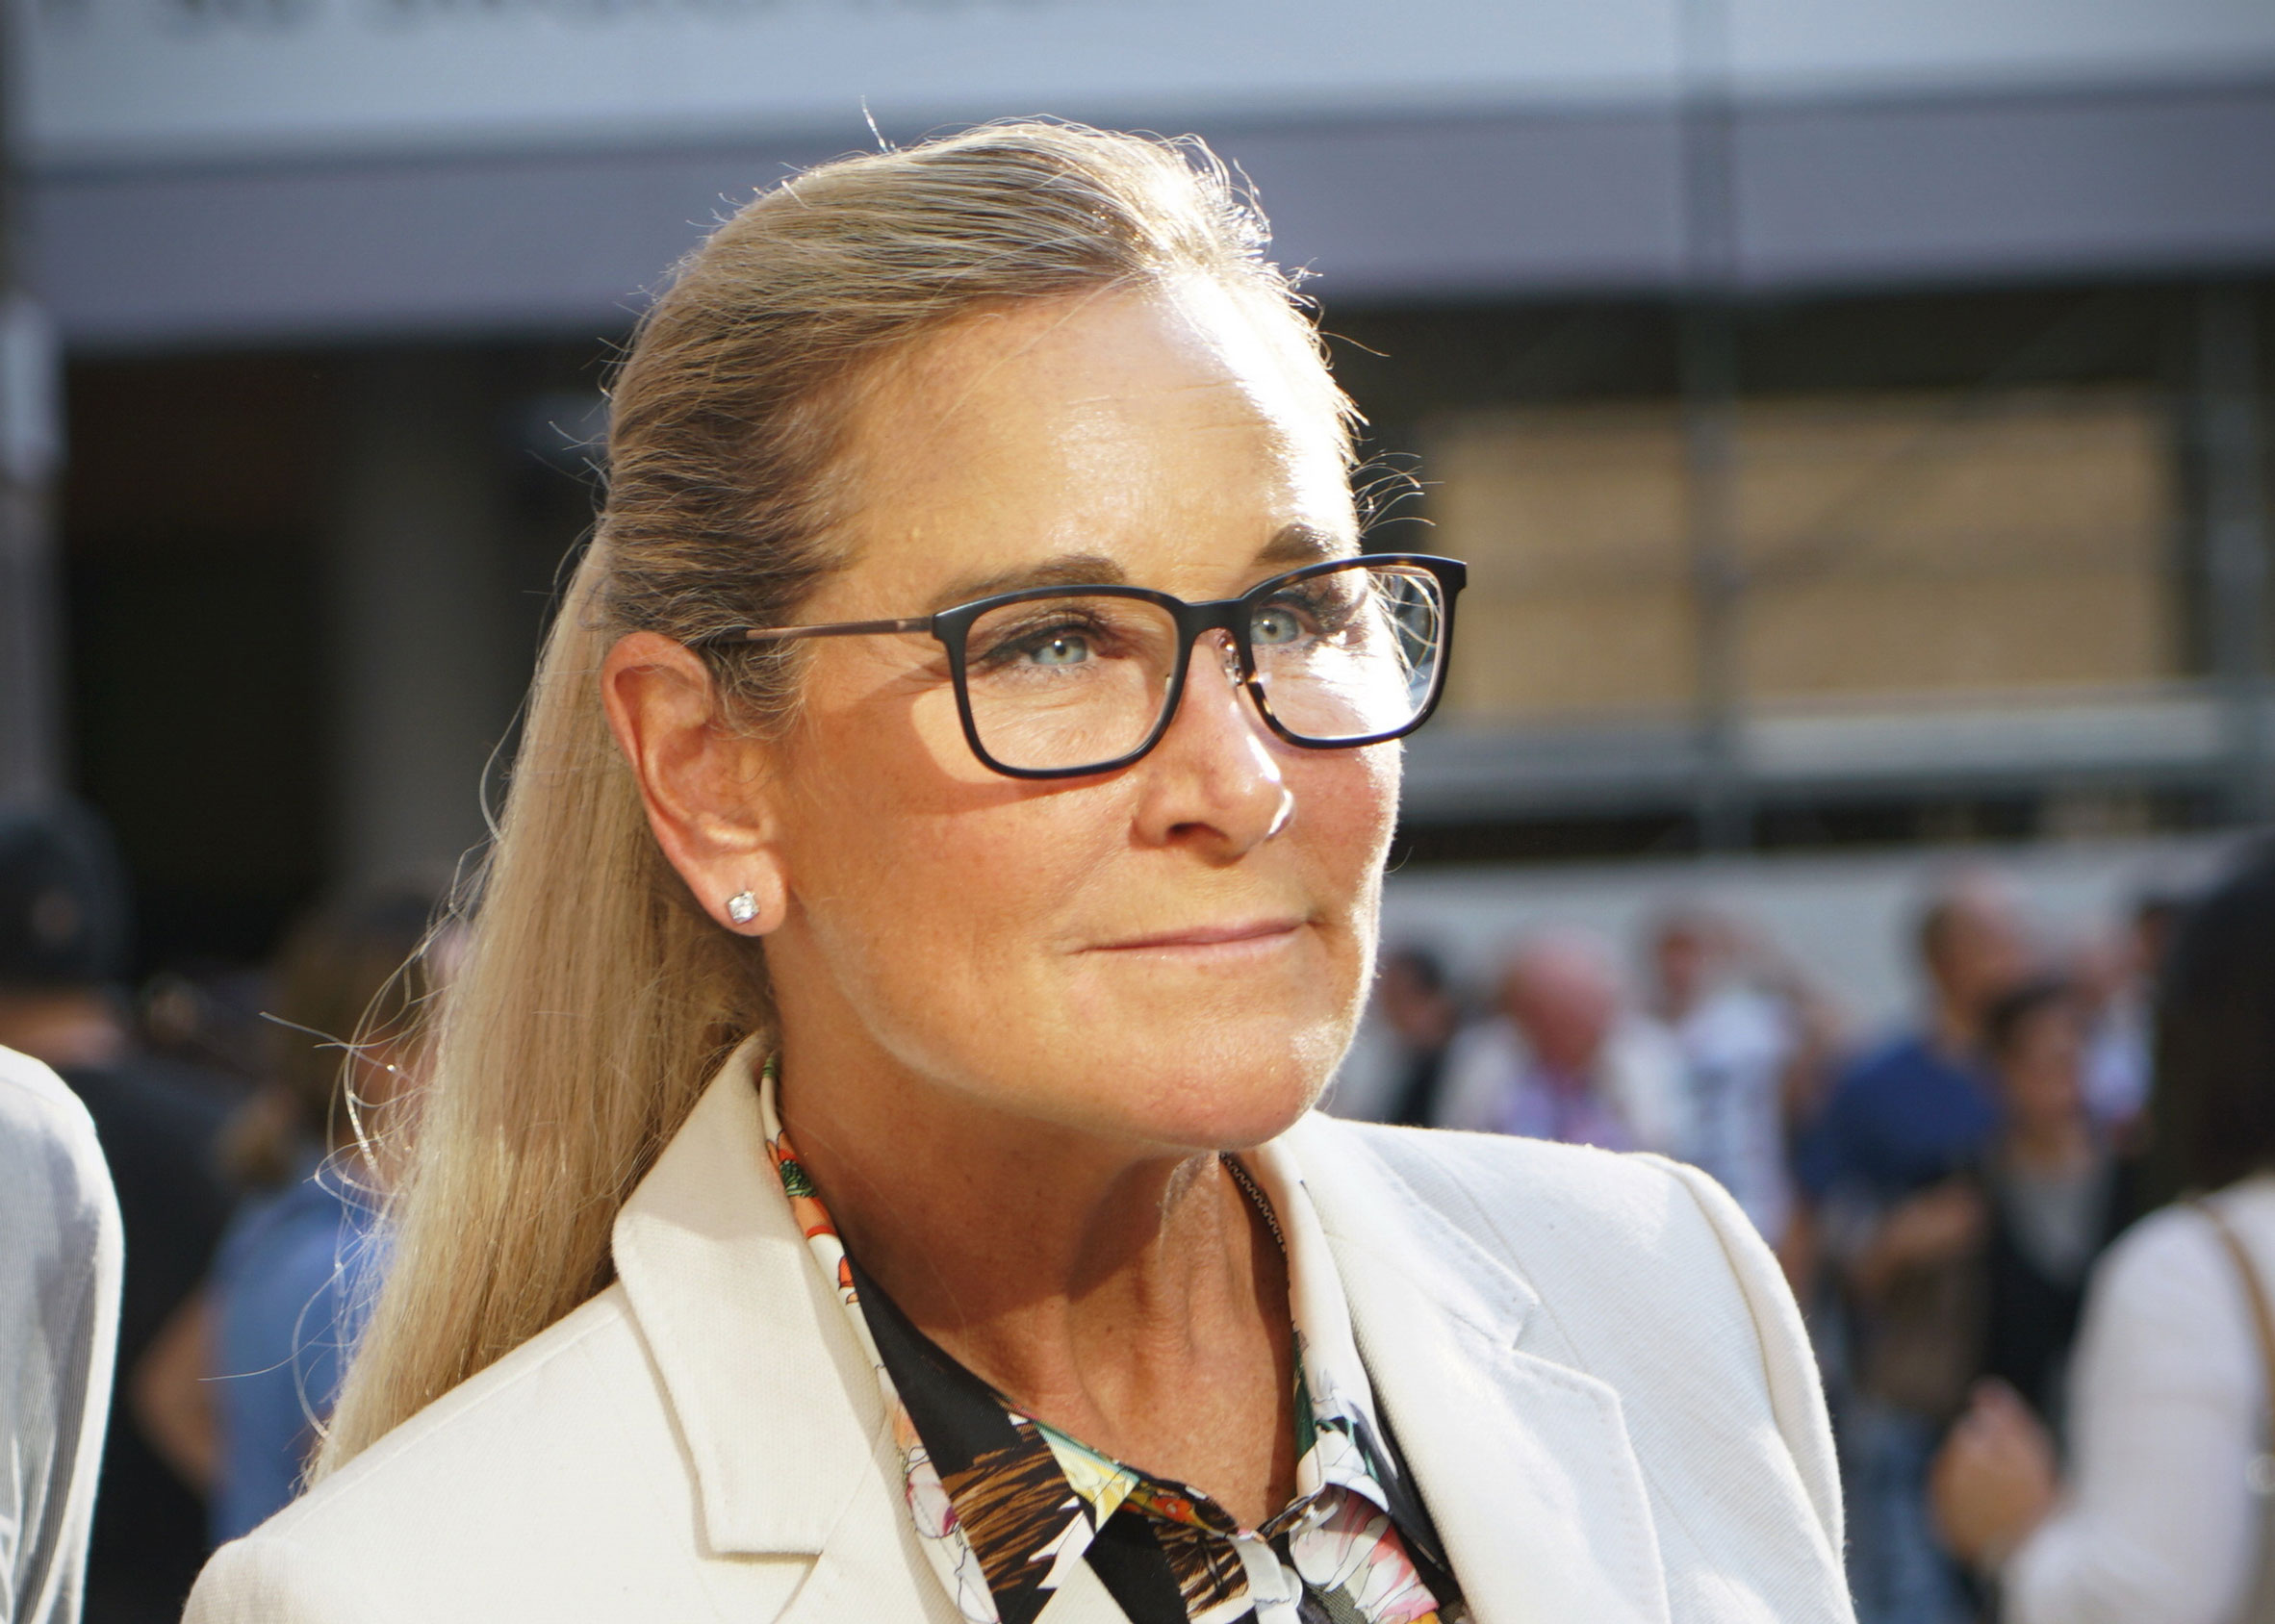 Apple's head of retail Angela Ahrendts to step down